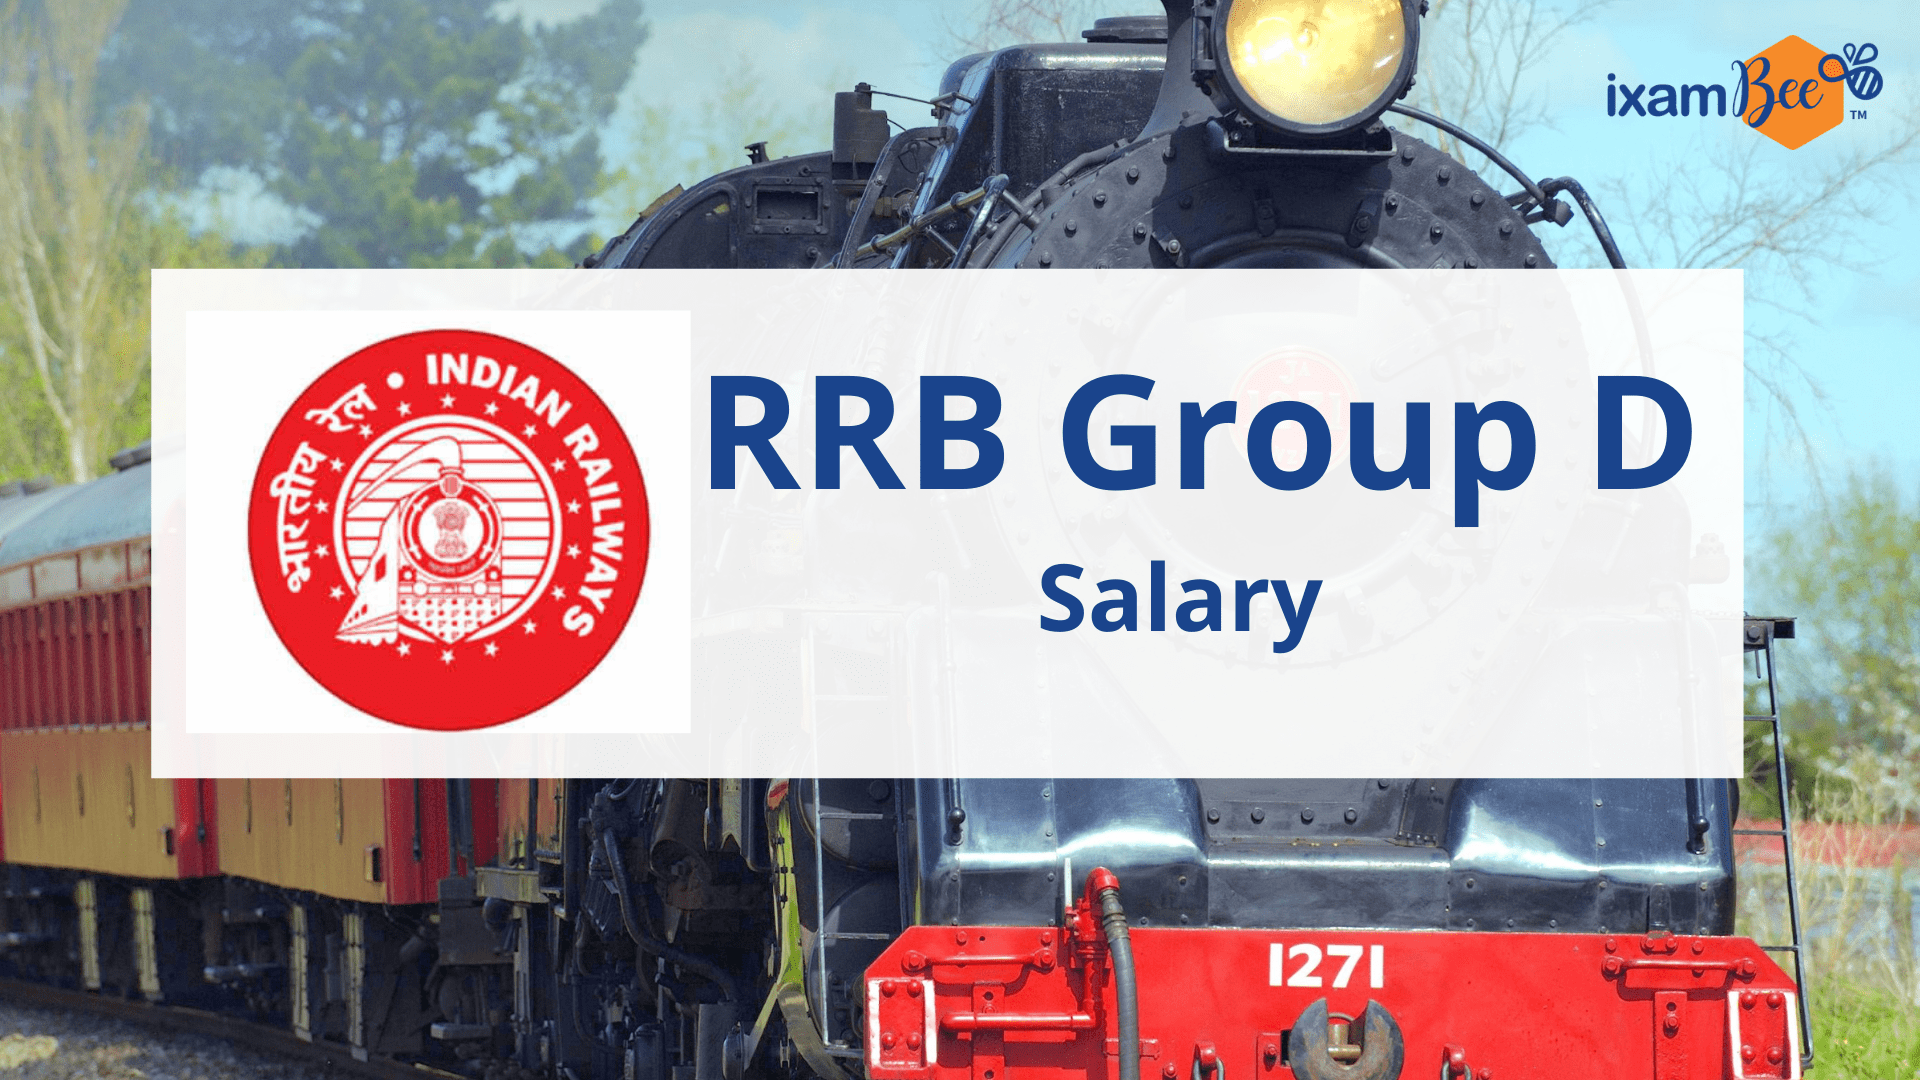 RRB Group D Salary